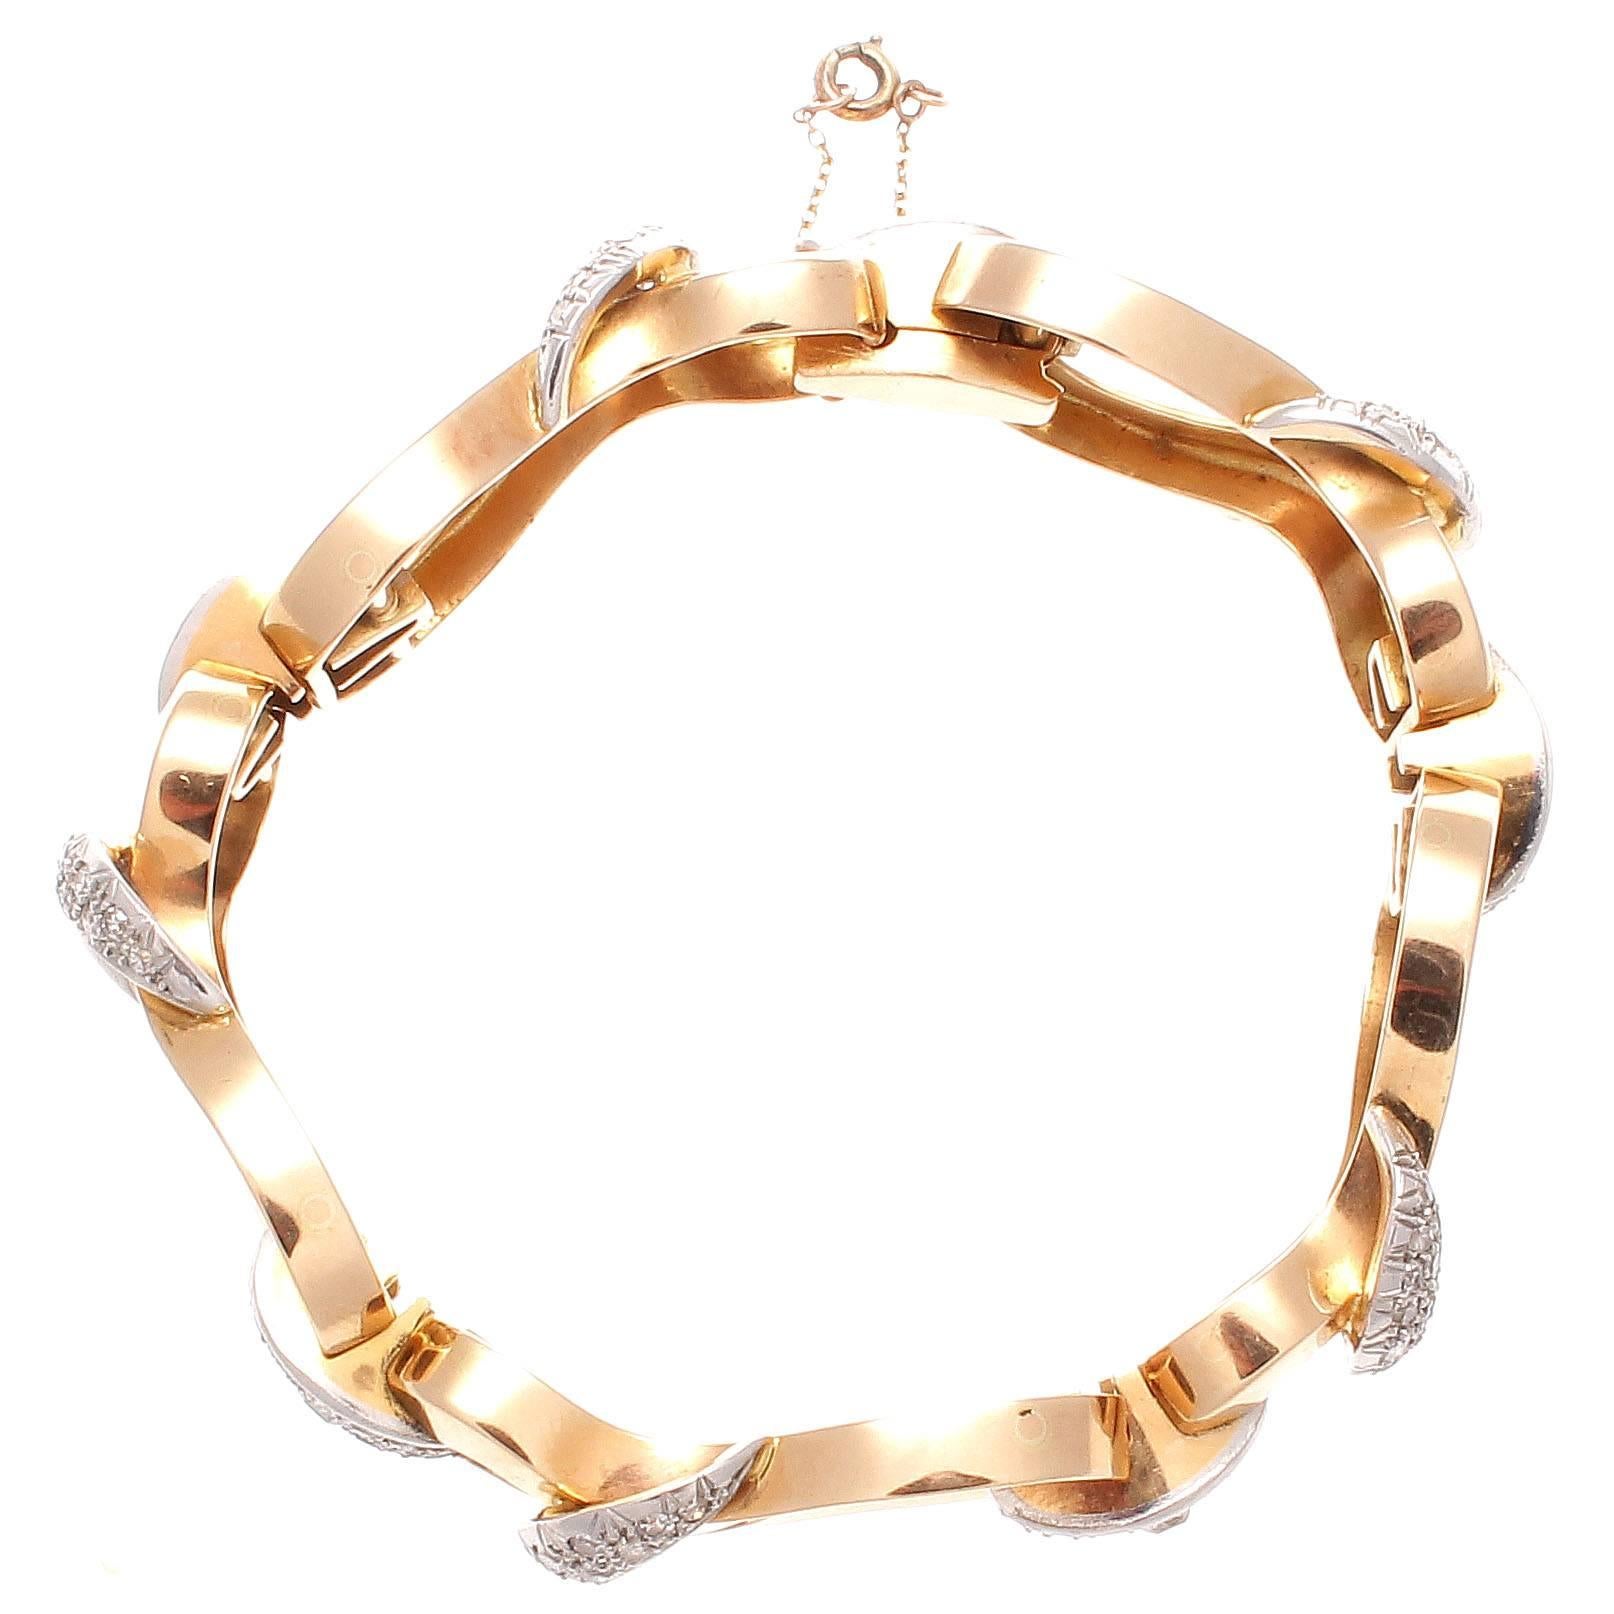 From the very cool retro period comes this well designed and executed diamond gold bracelet. Fun to wear at any soiree it will be much appreciated not only by the old school crowd but also the modern fashionistas. 

Hand crafted in 18k gold. 